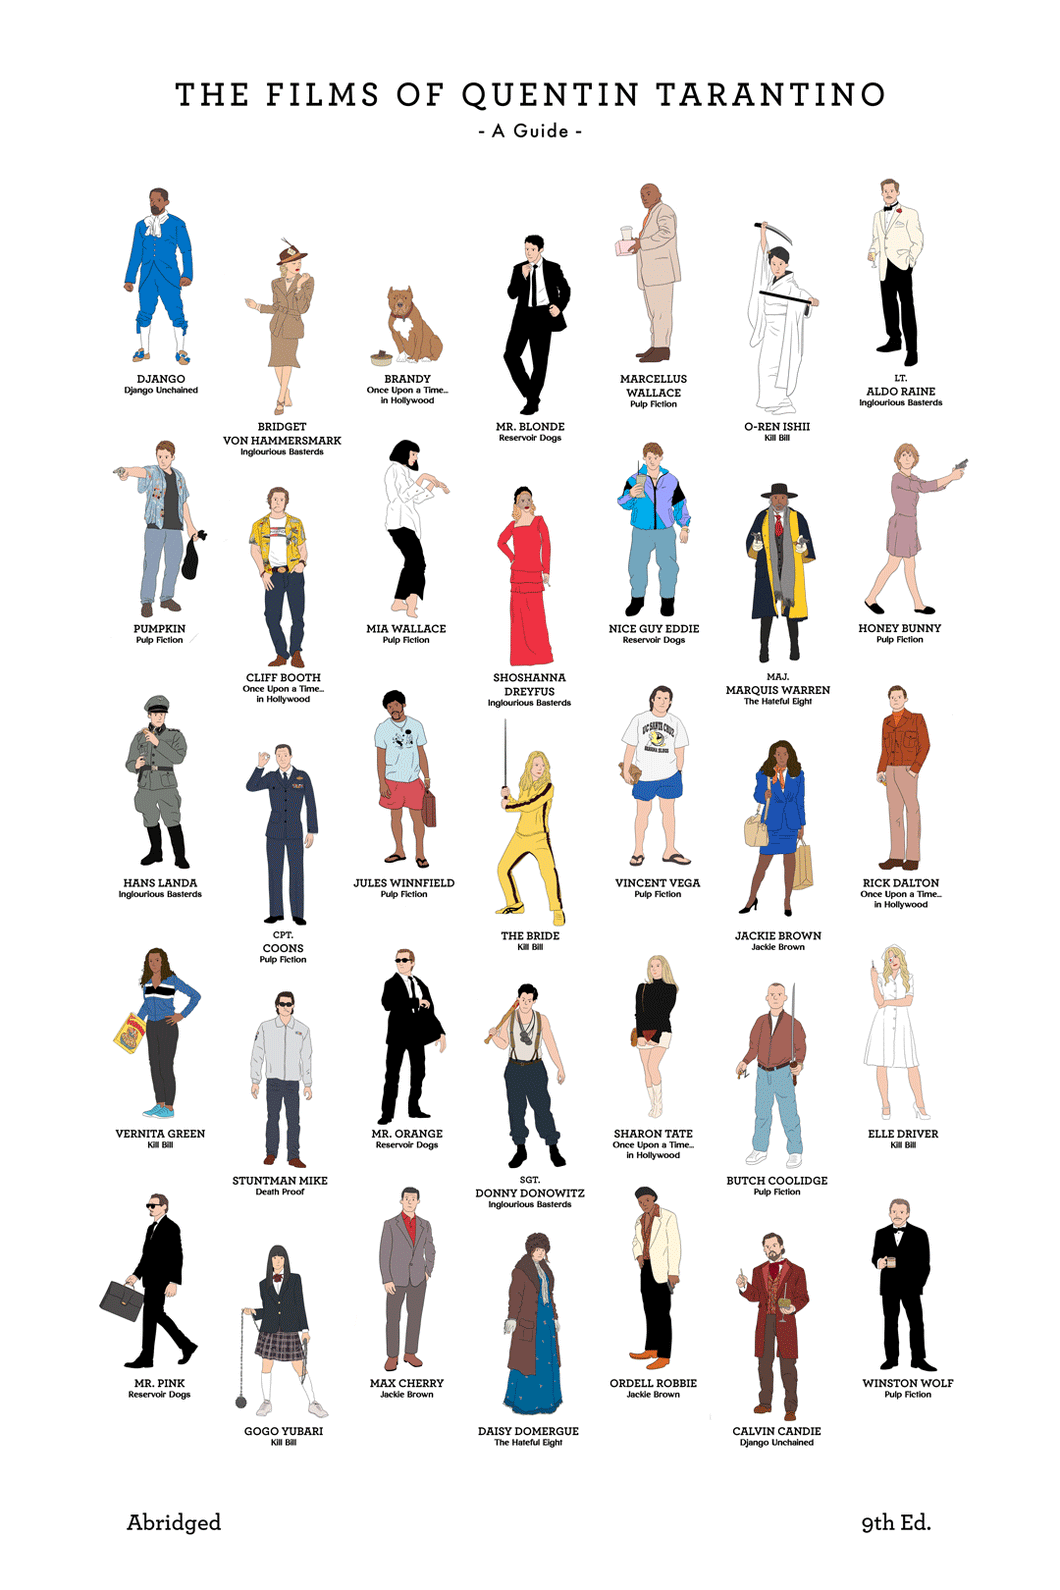 The Films of Quentin Tarantino (9th Edition)